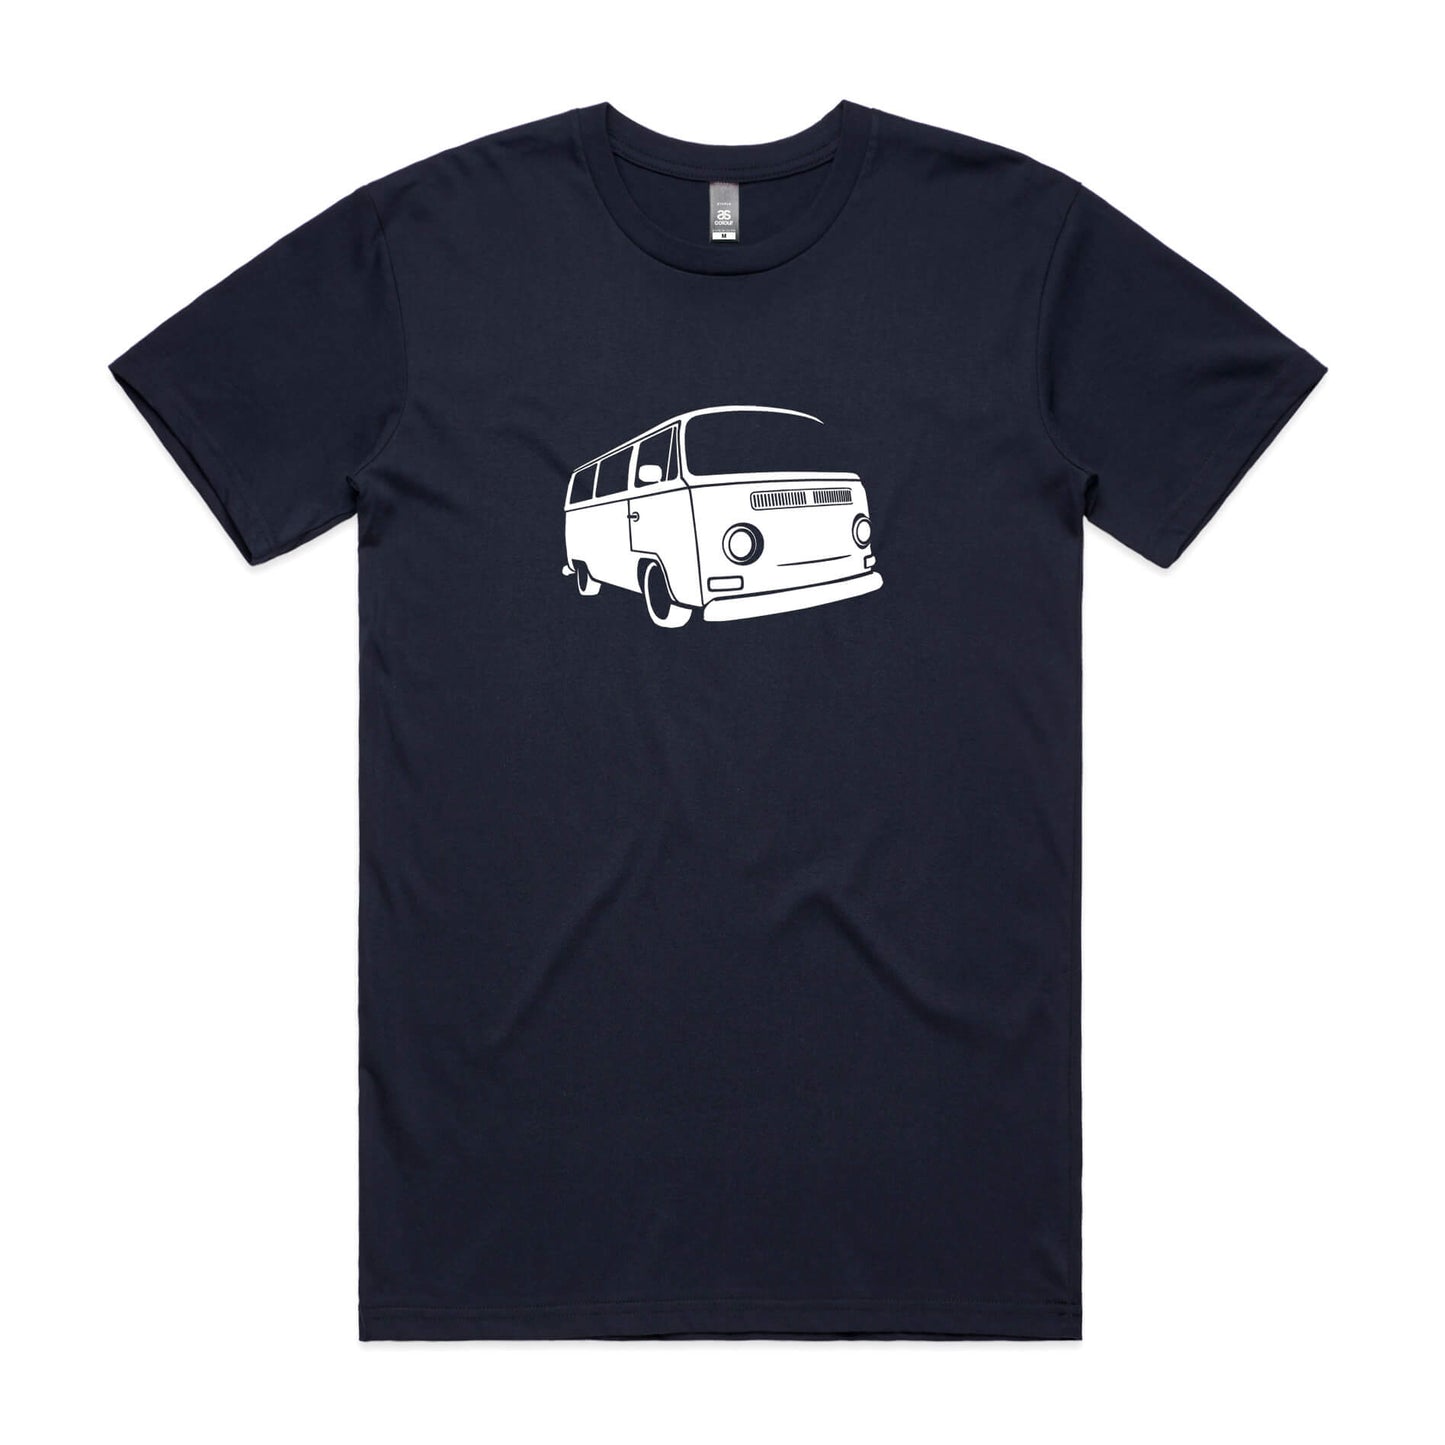 VW Kombi t-shirt in navy blue with white Volkswagen bus graphic